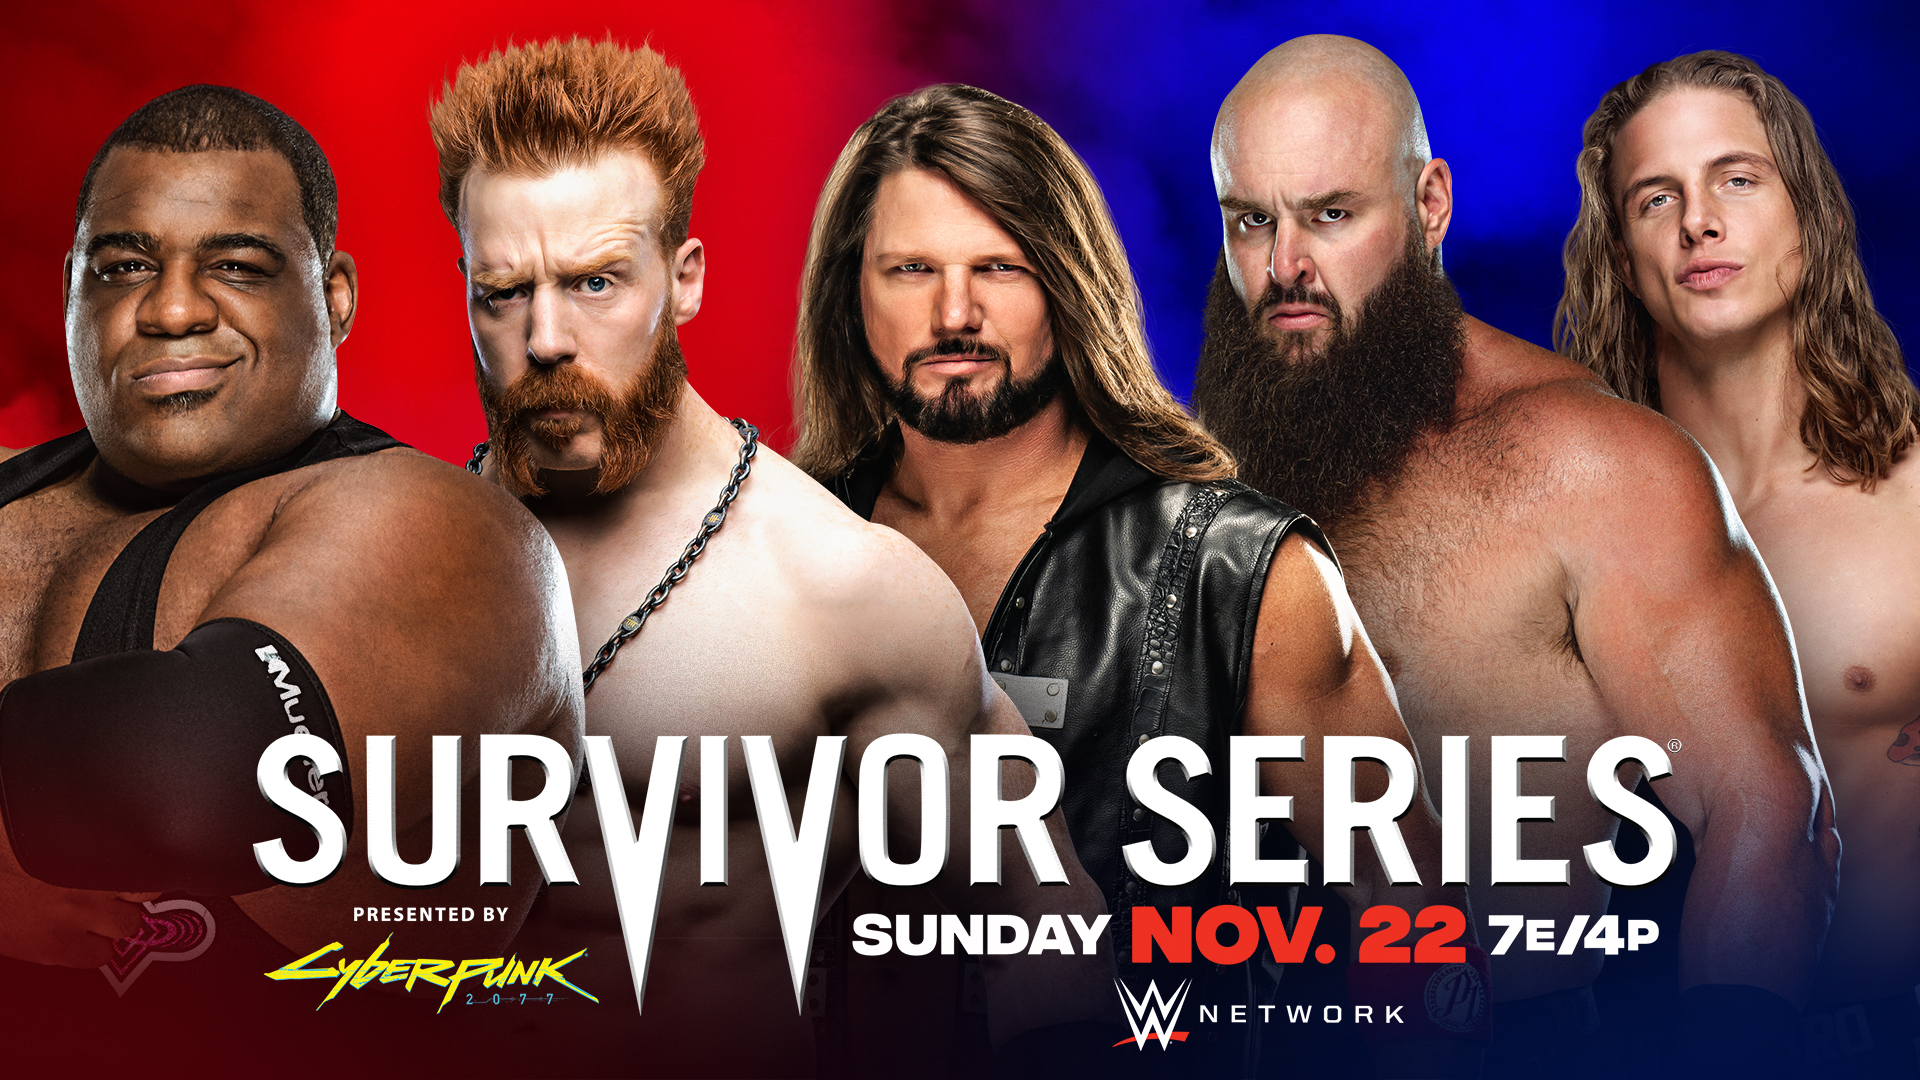 Wwe Survivor Series Prediction On Traditional Elimination Tag Matches